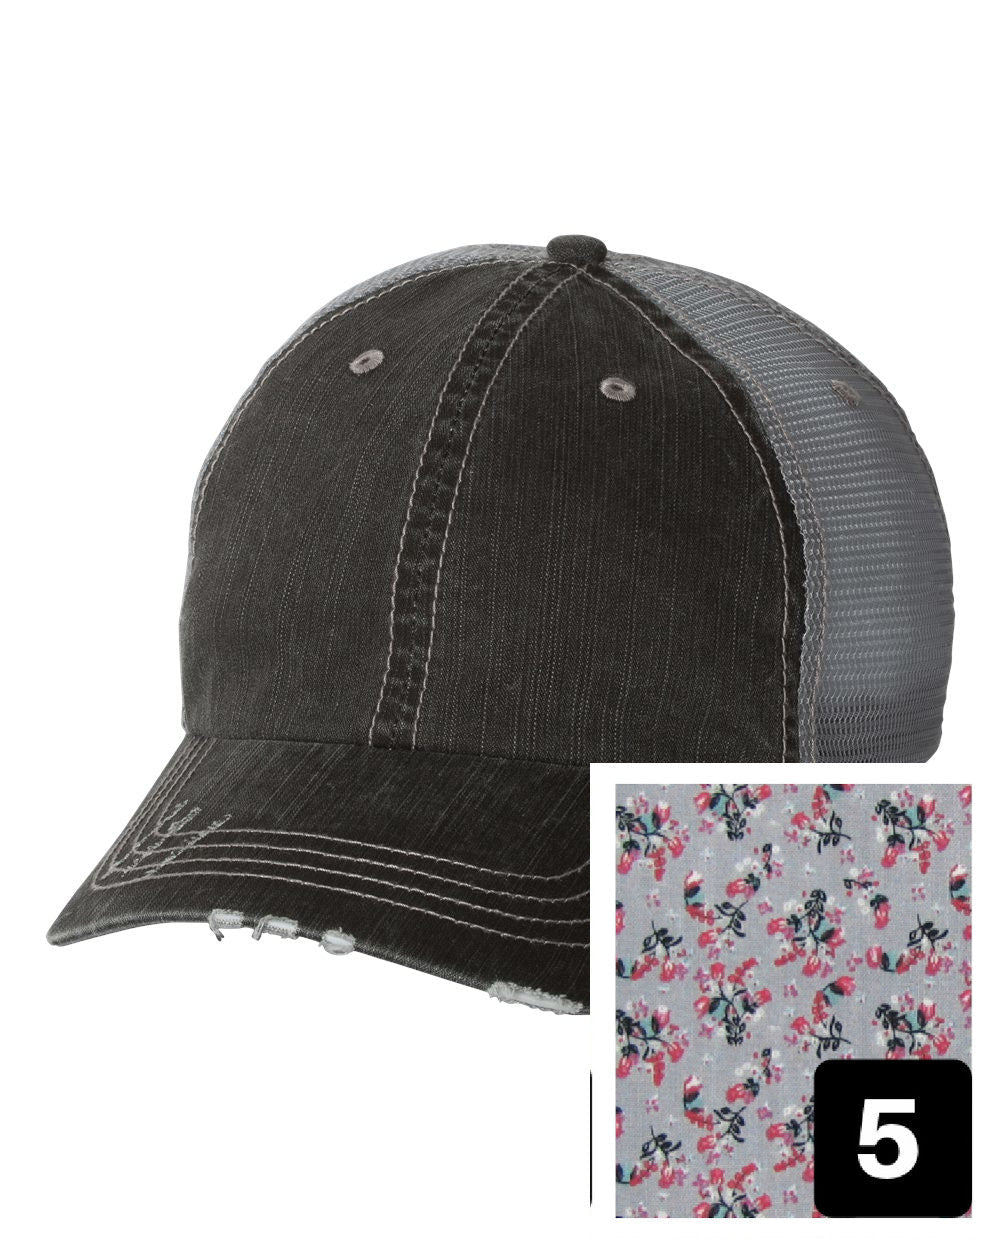 gray distressed trucker hat with purple and pink floral fabric state of Louisiana